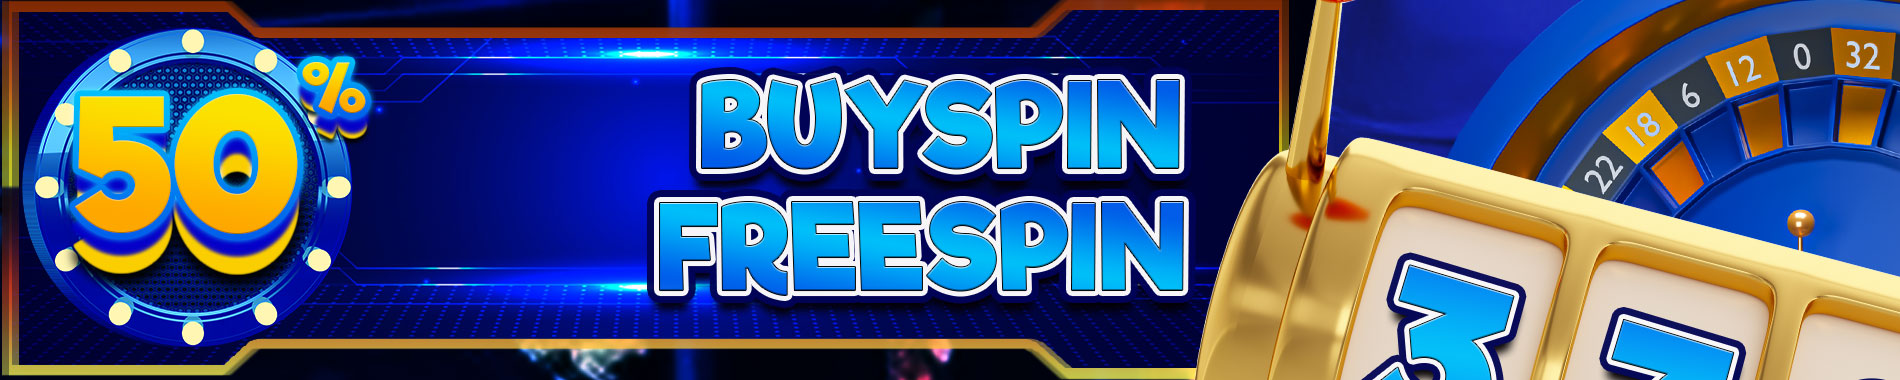 EVENT FREESPIN 25% & BUYSPIN 20%